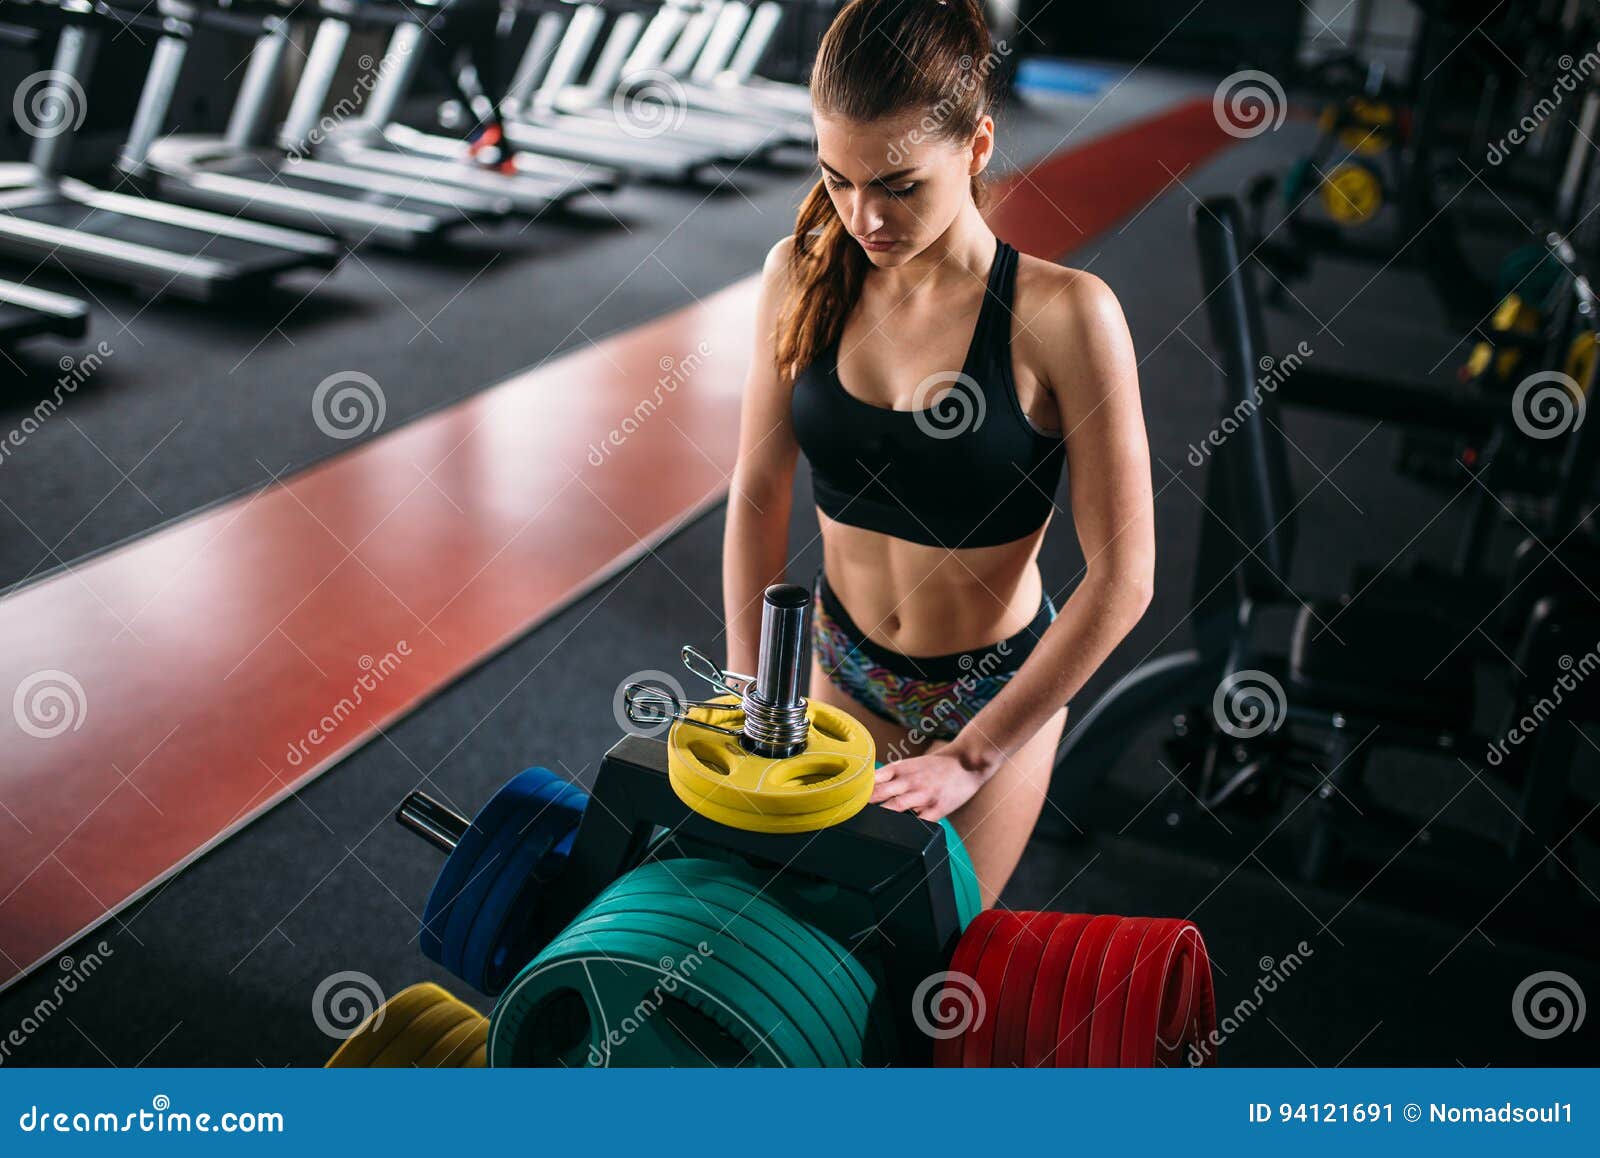 Athletic Woman in Sportswear, Sport Gym Stock Image - Image of fitness ...